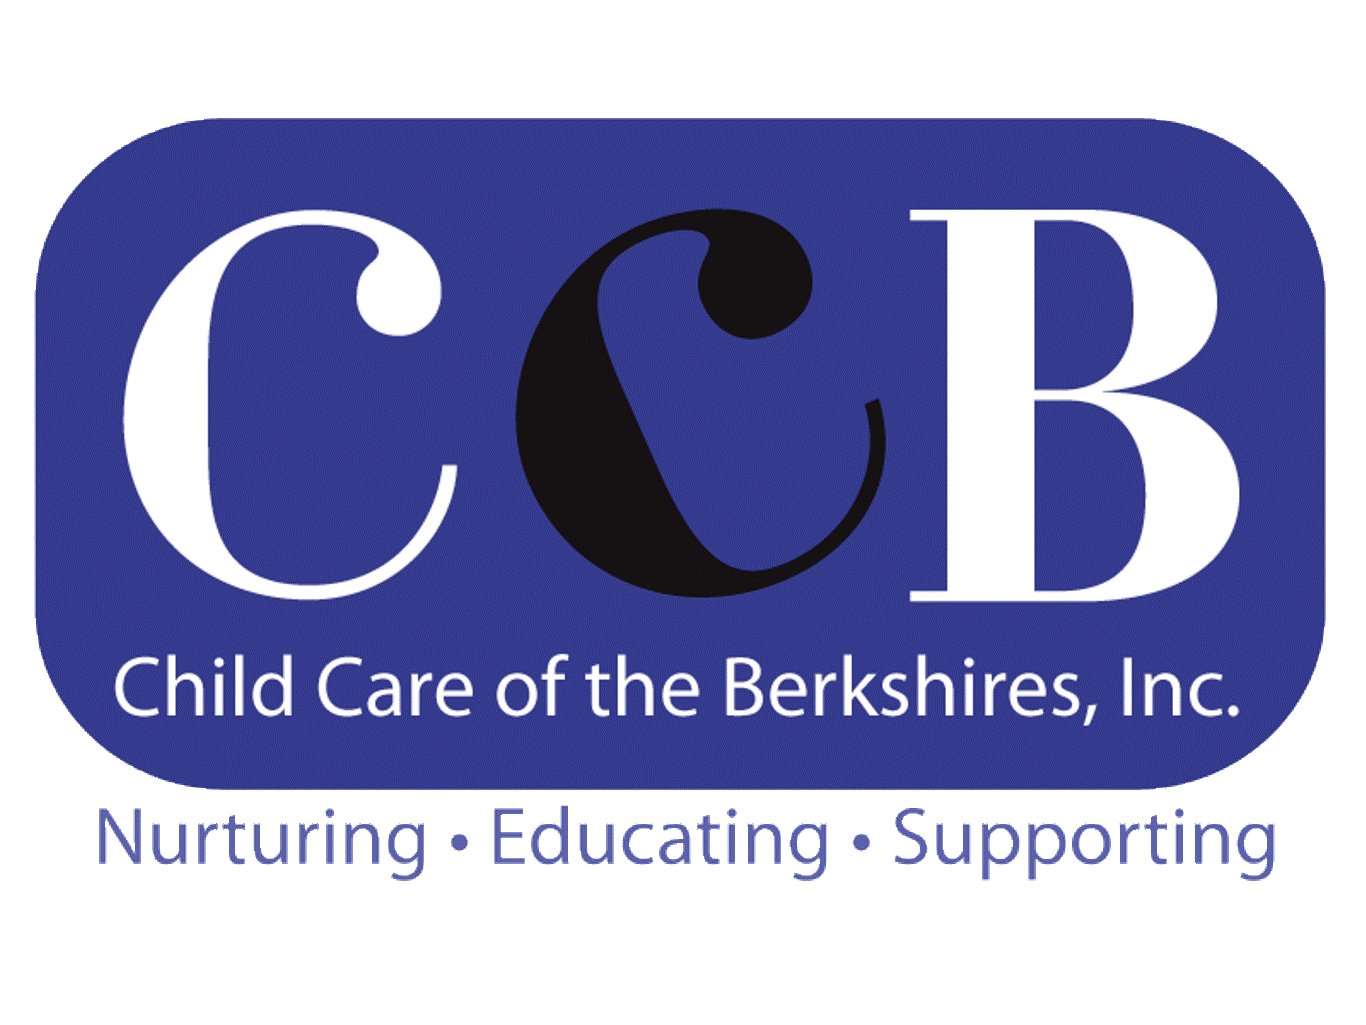 ccb logo adjusted to higher pixels.gif